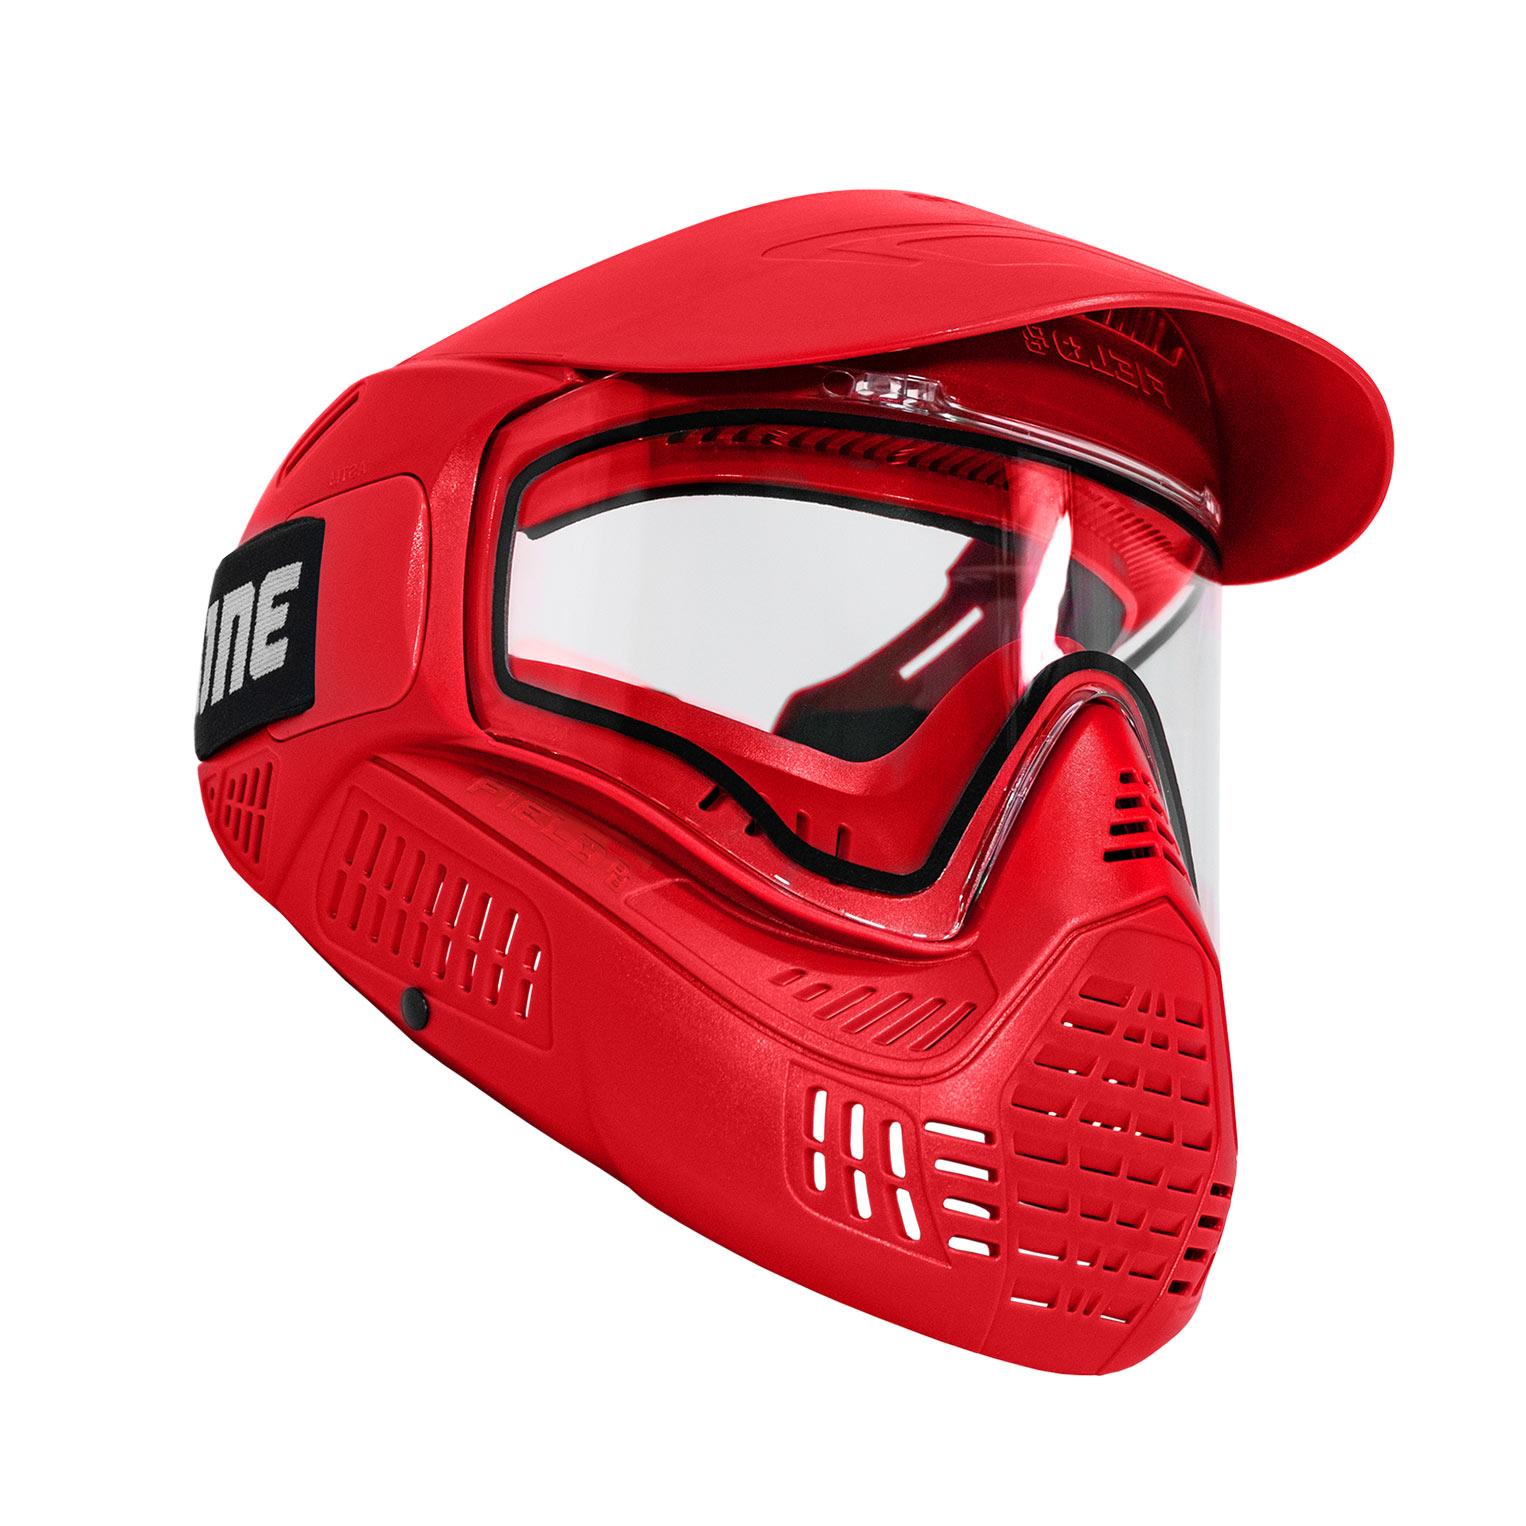 Goggle #ONE Thermal Red V2 - Rubber Foam